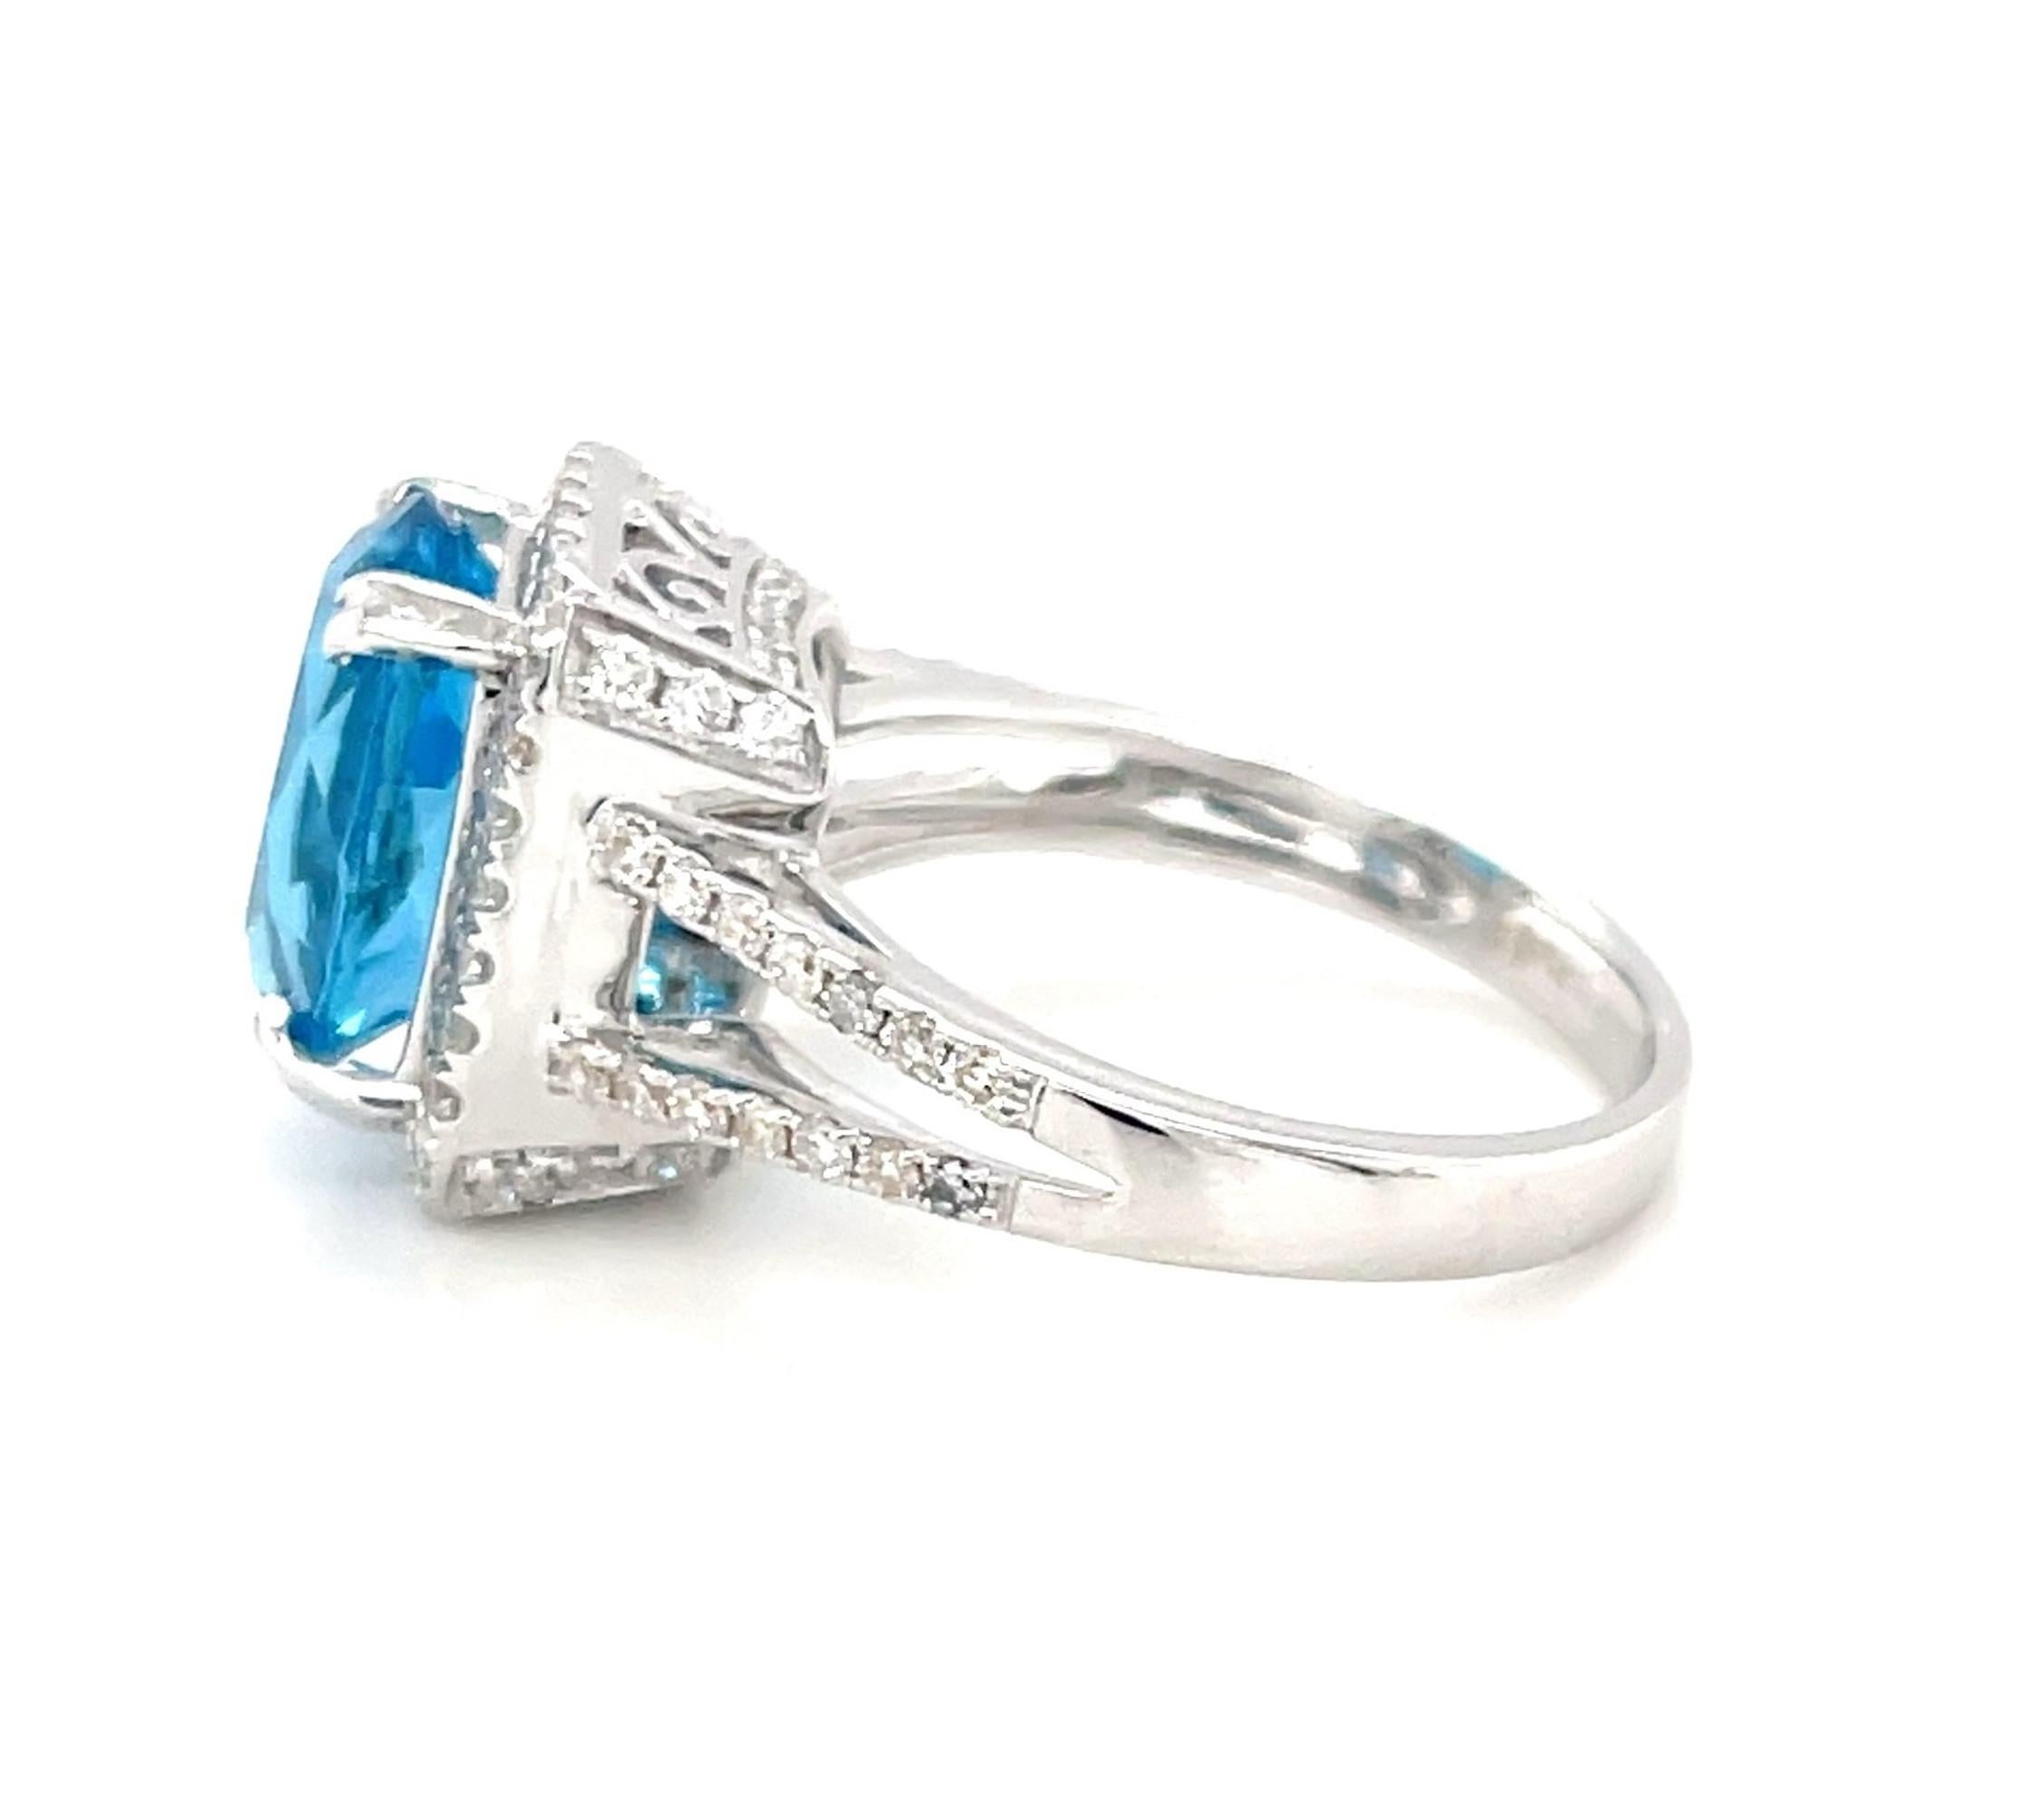 Oval Cut 4.38 Carat Blue Topaz and Diamond Halo Cocktail Ring in 18k White Gold  For Sale